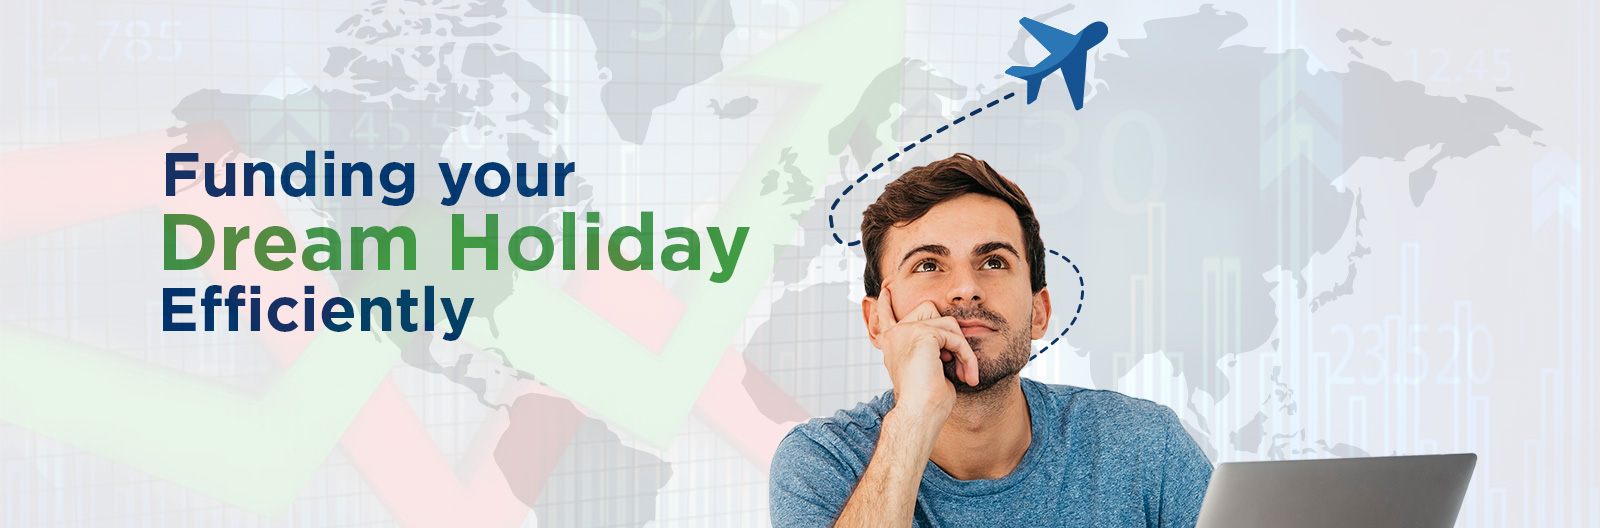 funding your dream holiday efficiently